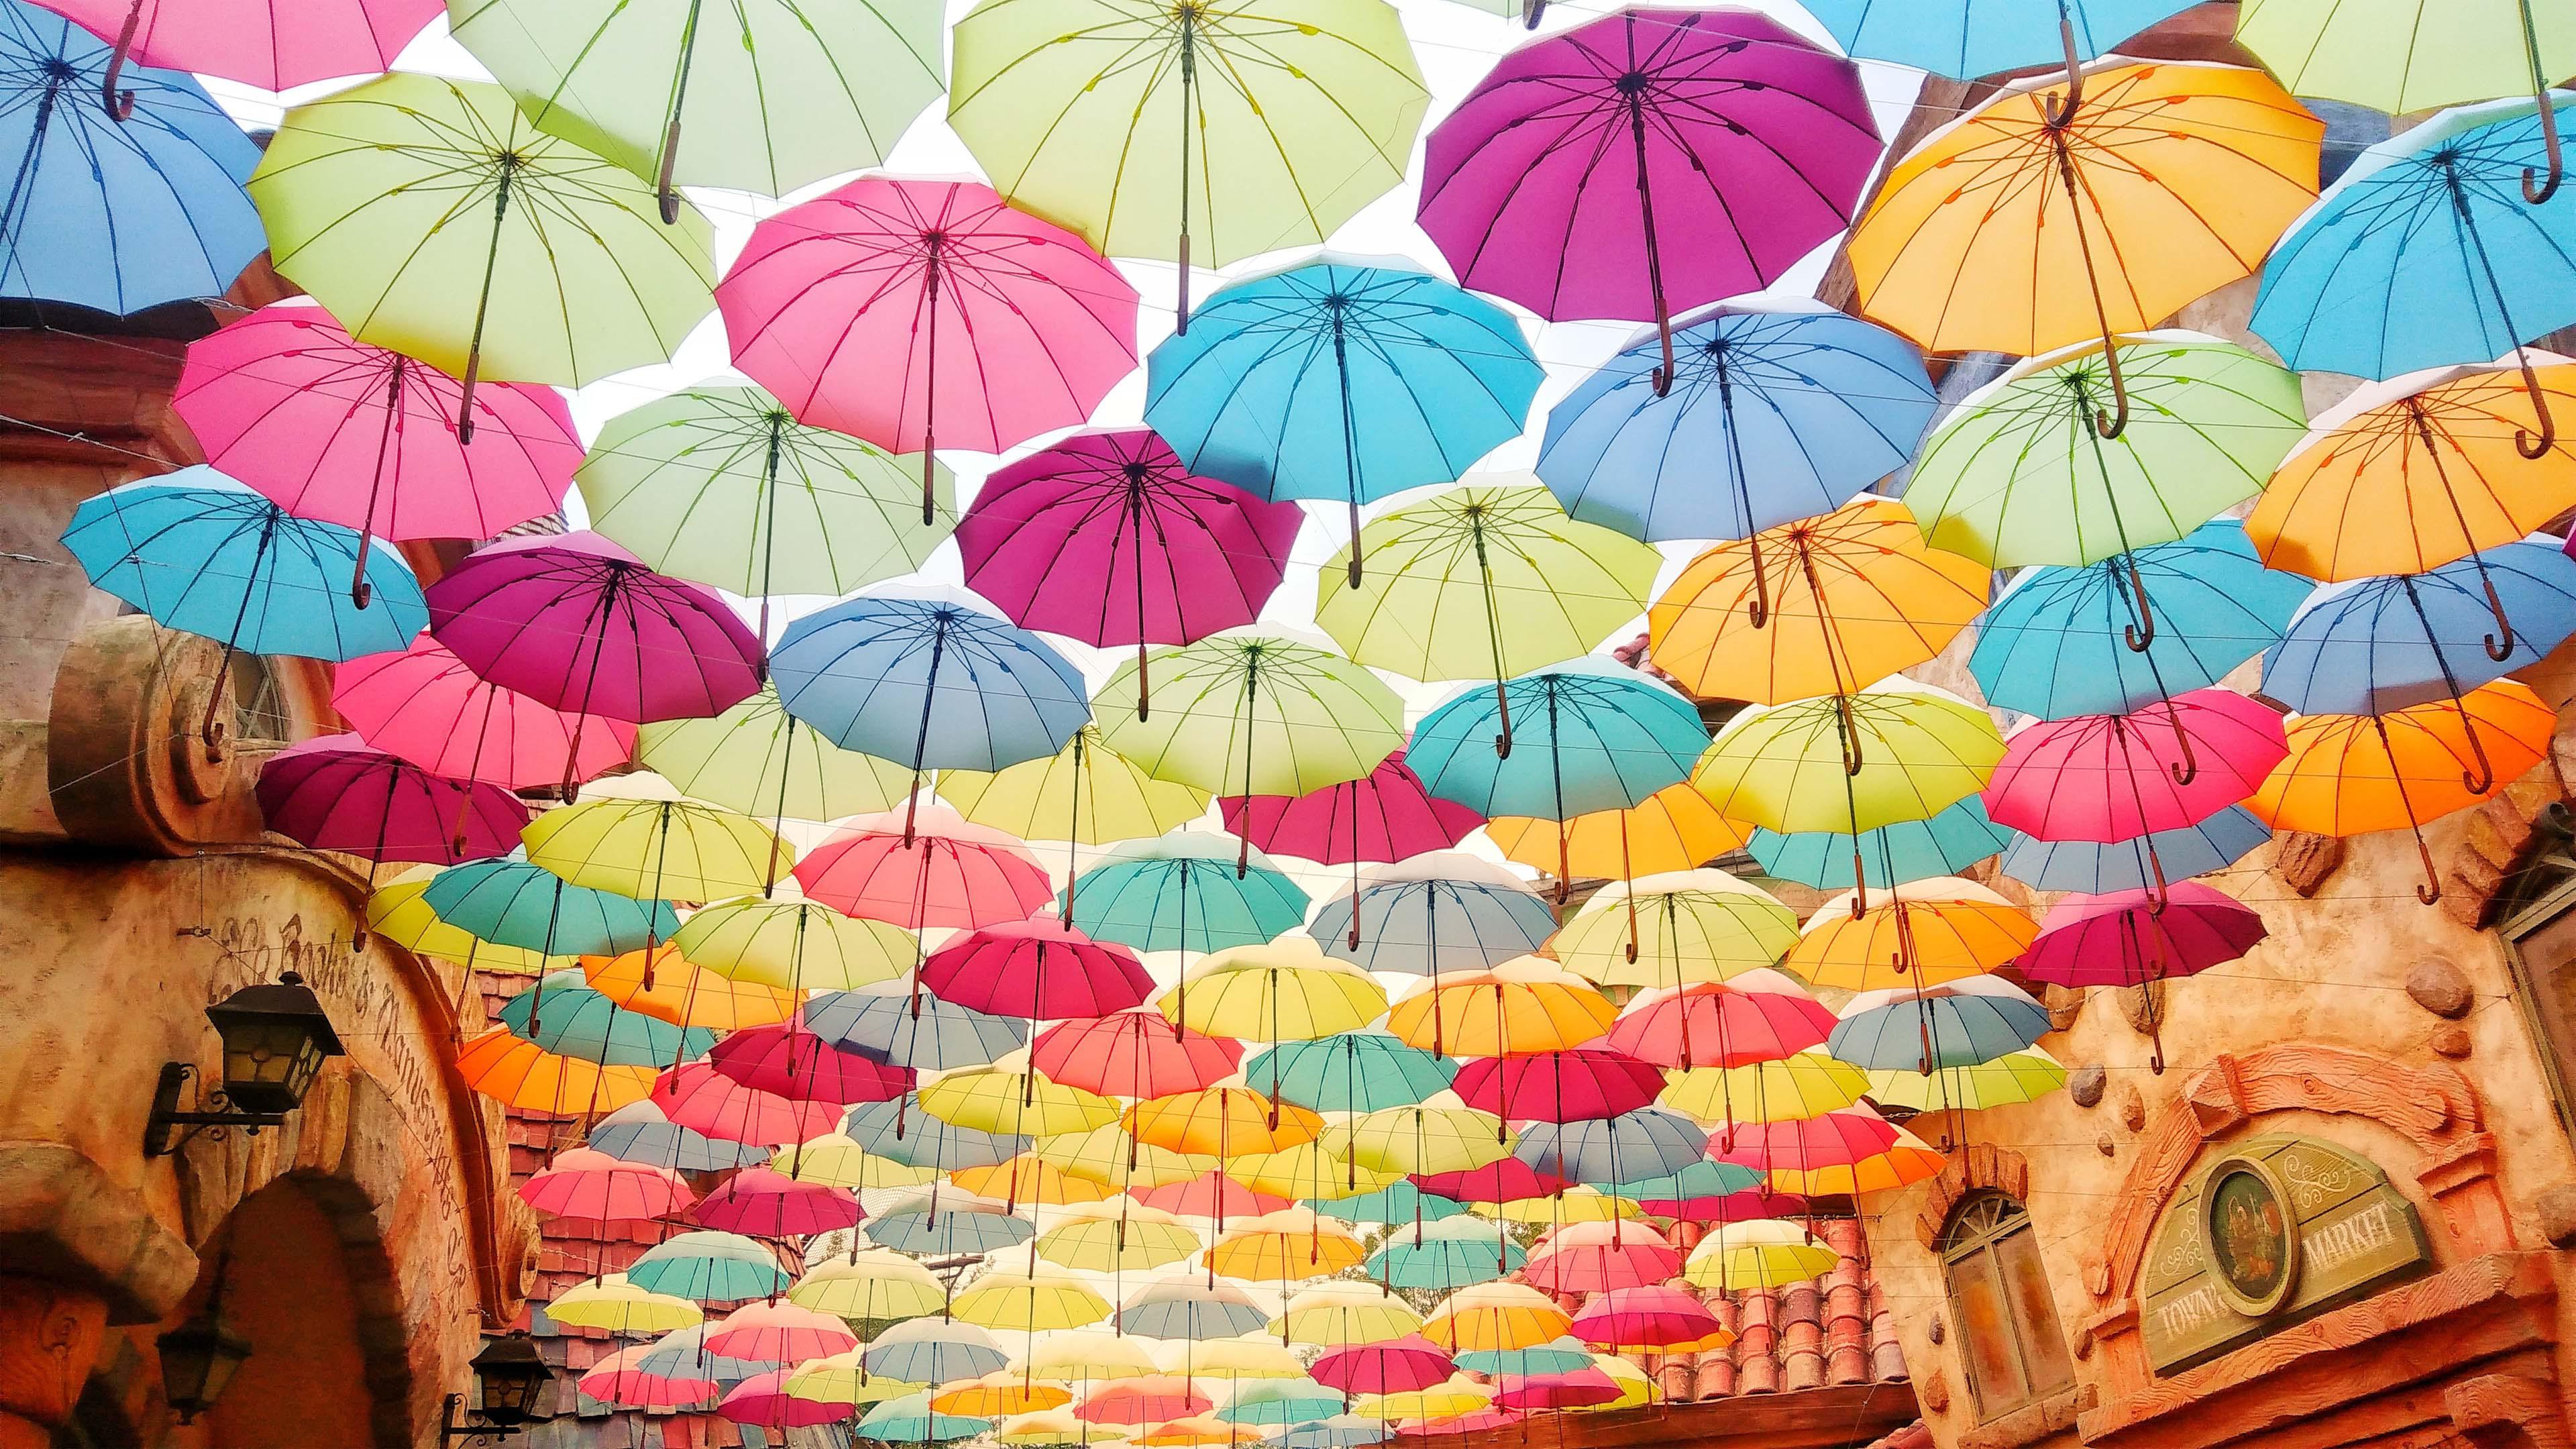 Umbrella 4K wallpaper for your desktop or mobile screen free and easy to download